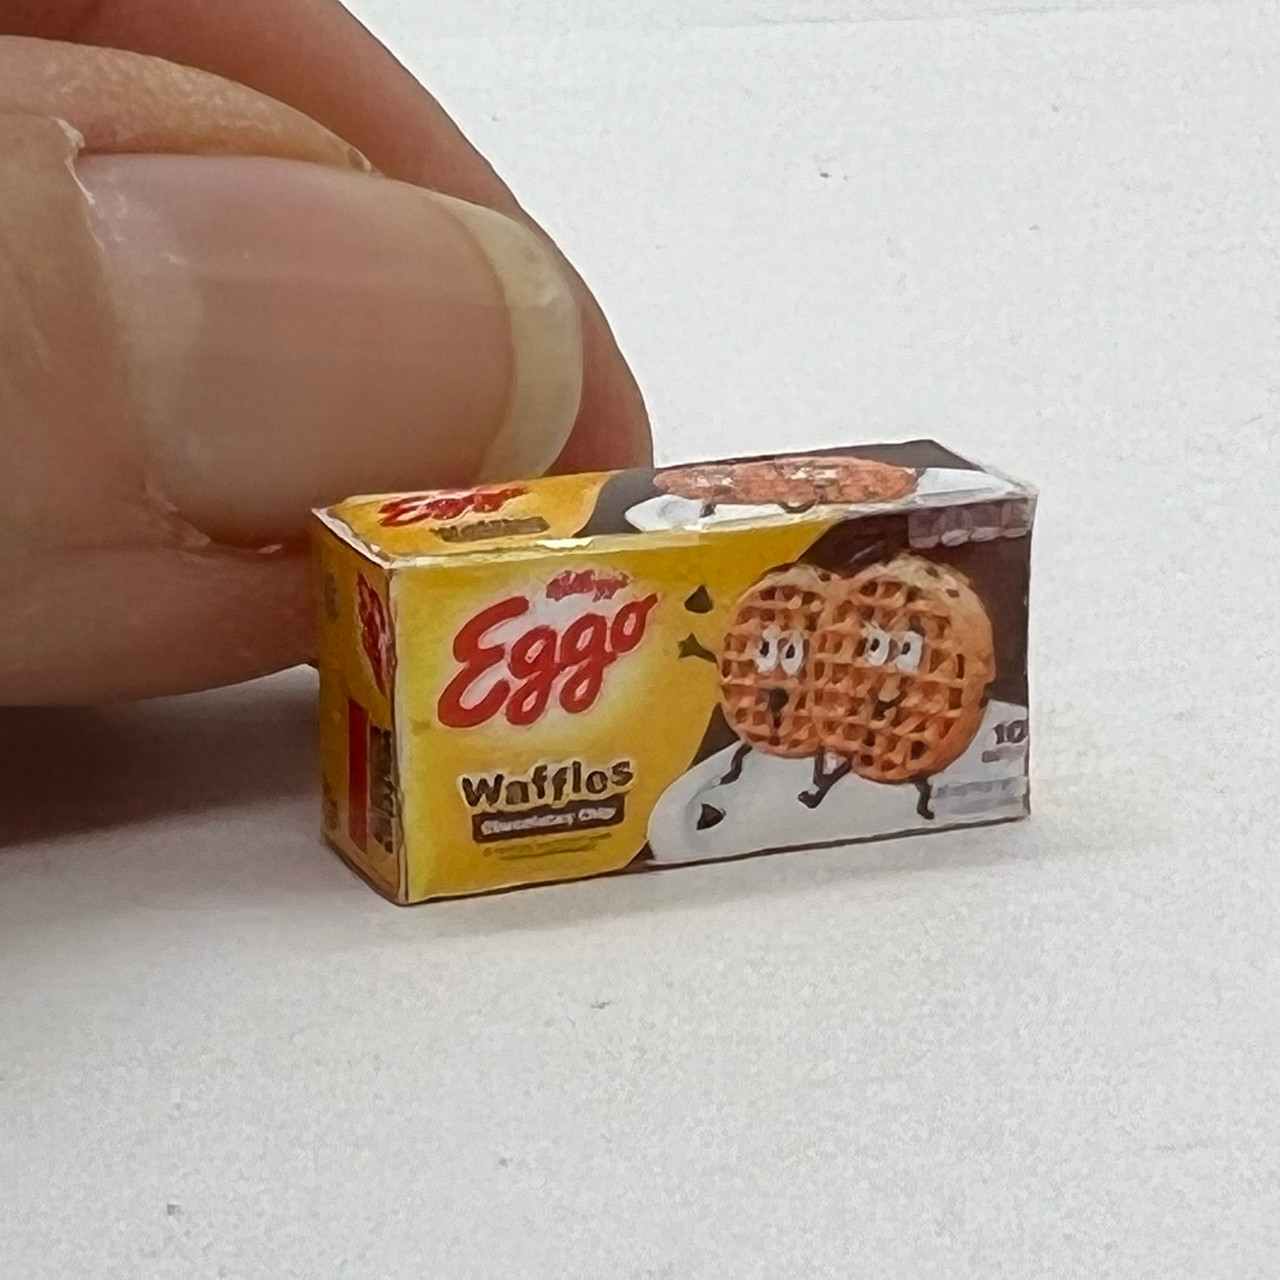 Eggo Waffles (CIMIG4632) with fingers for scale